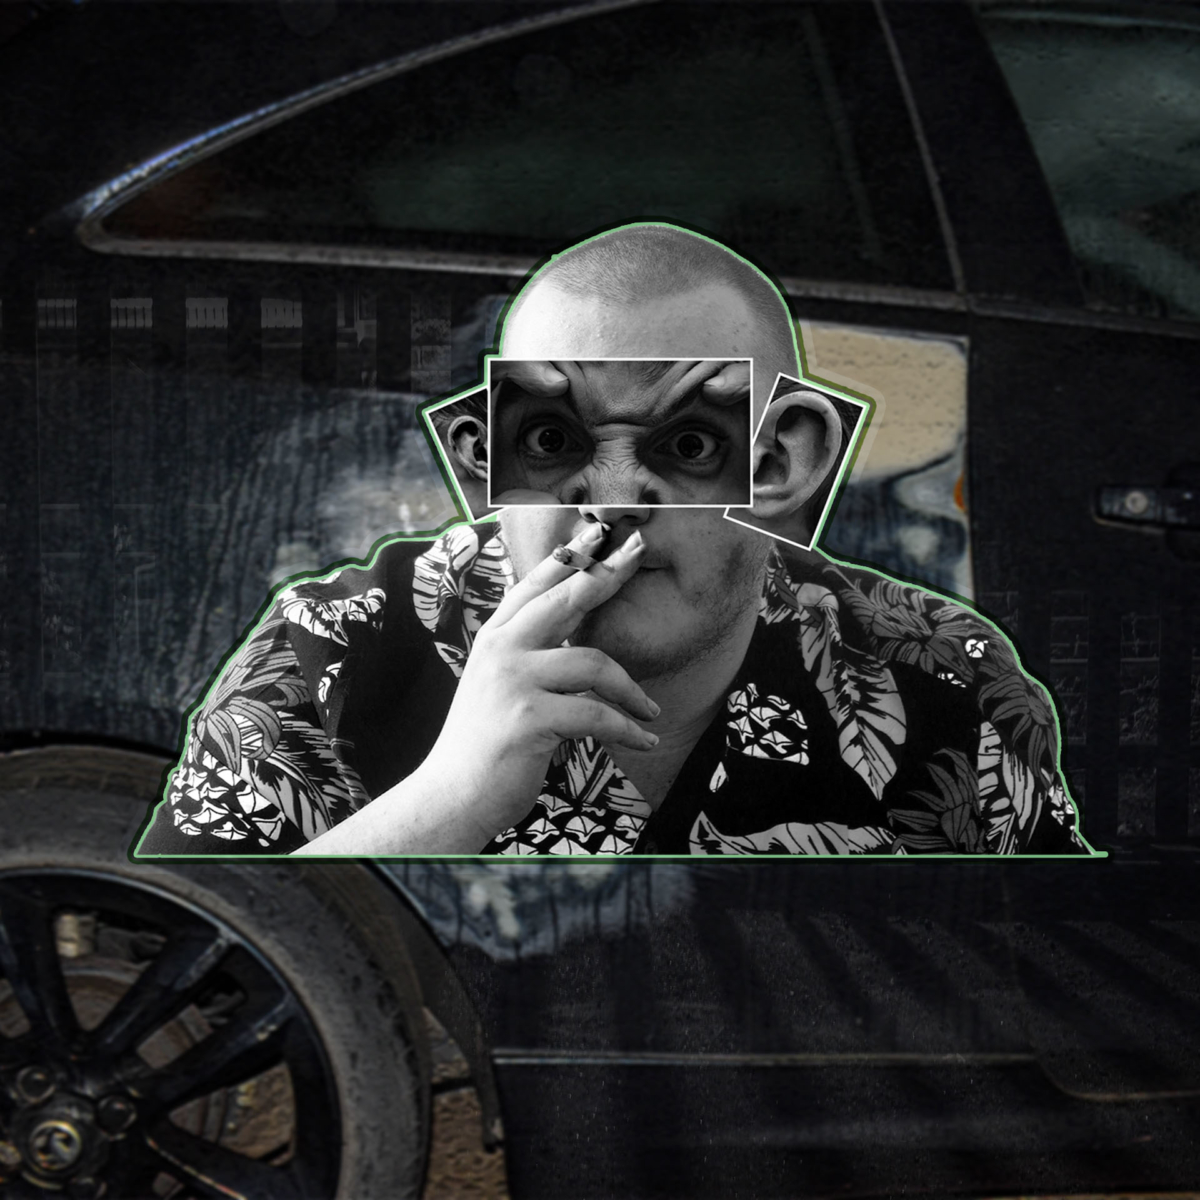 Lil' Ghetto Boy - Dr. Dre is the sound of urban streets. We hear a fusion of jazz and hip hop. This blend was flashy but pays homage to it's roots of the streets. The car in the background is to represent the flashy but still rustic vibe to the song. My subject is to represent the 'intimidating hard get away' look that the song also portrays.